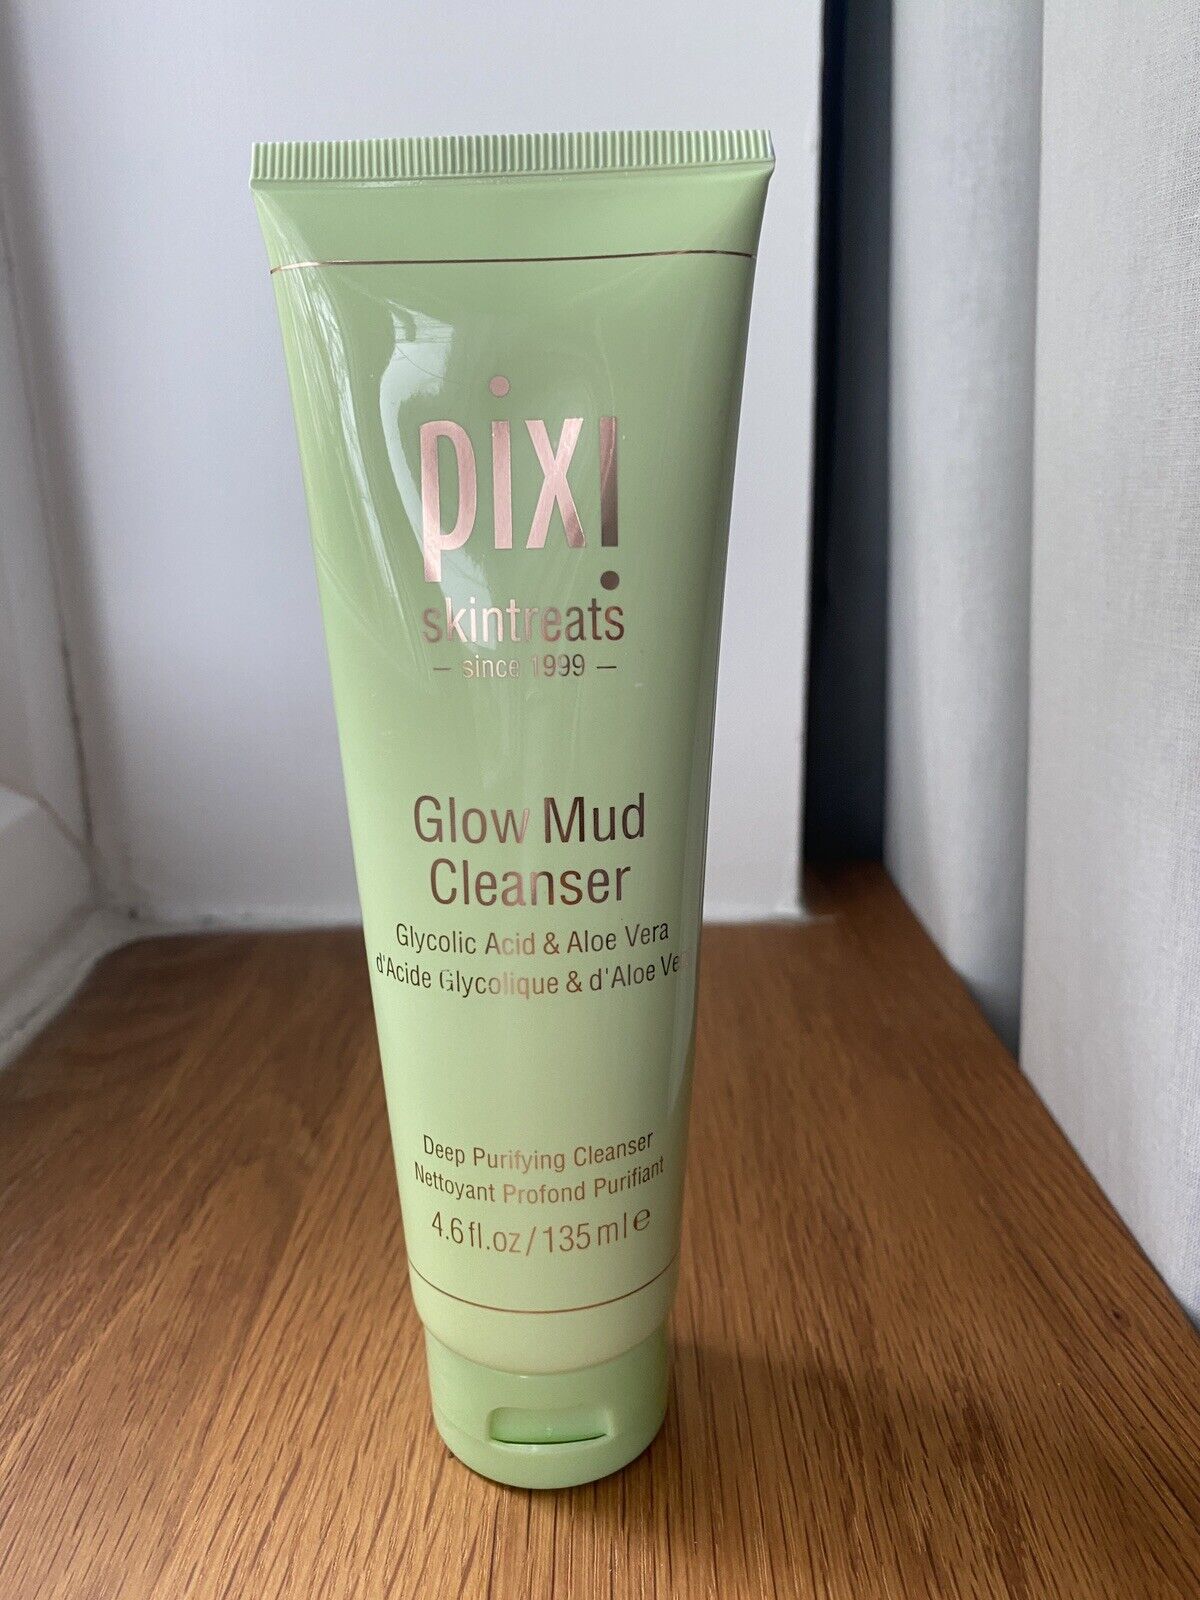 Pixi Glow Mud Cleanser with Glycolic Acid